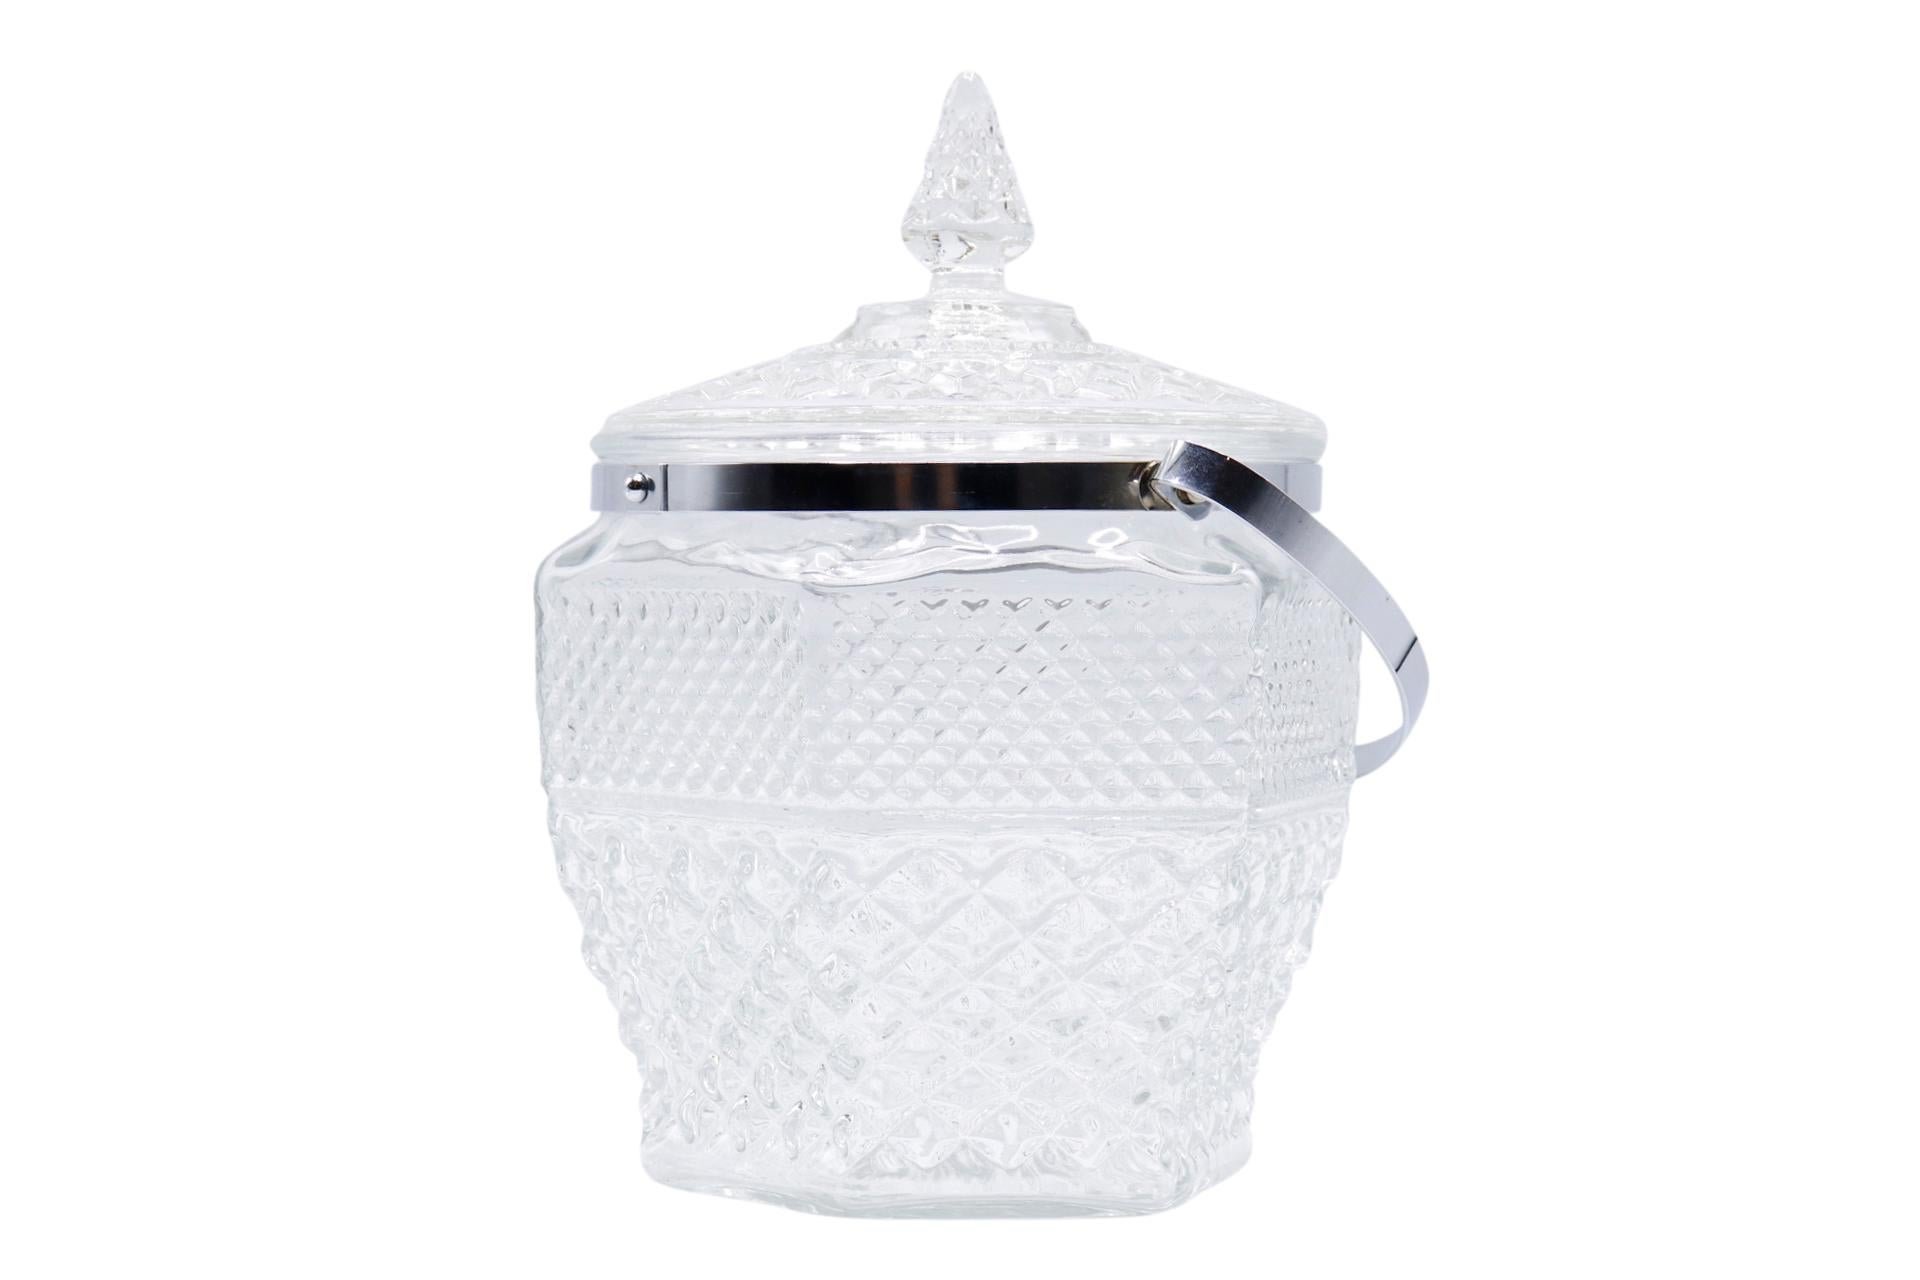 A Wexford crystal champagne cooler or ice bucket made by Anchor Hocking. A silver metal handle is attached to a collar fitted just under the lip. On top, a cut crystal lid lifts off with an acorn knob handle.